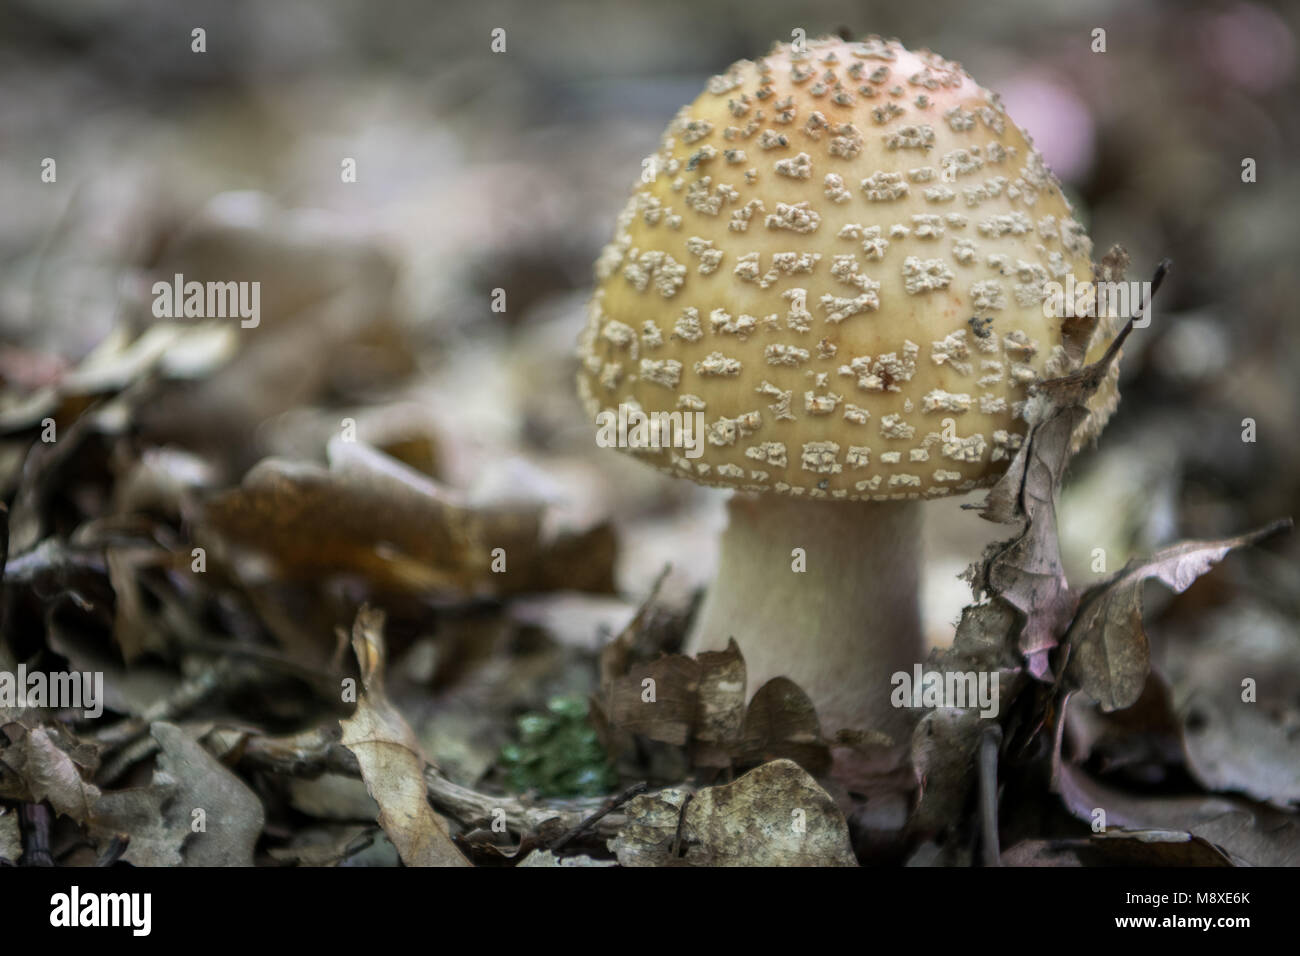 Poisonous mushroom blusher in forest leaves Stock Photo